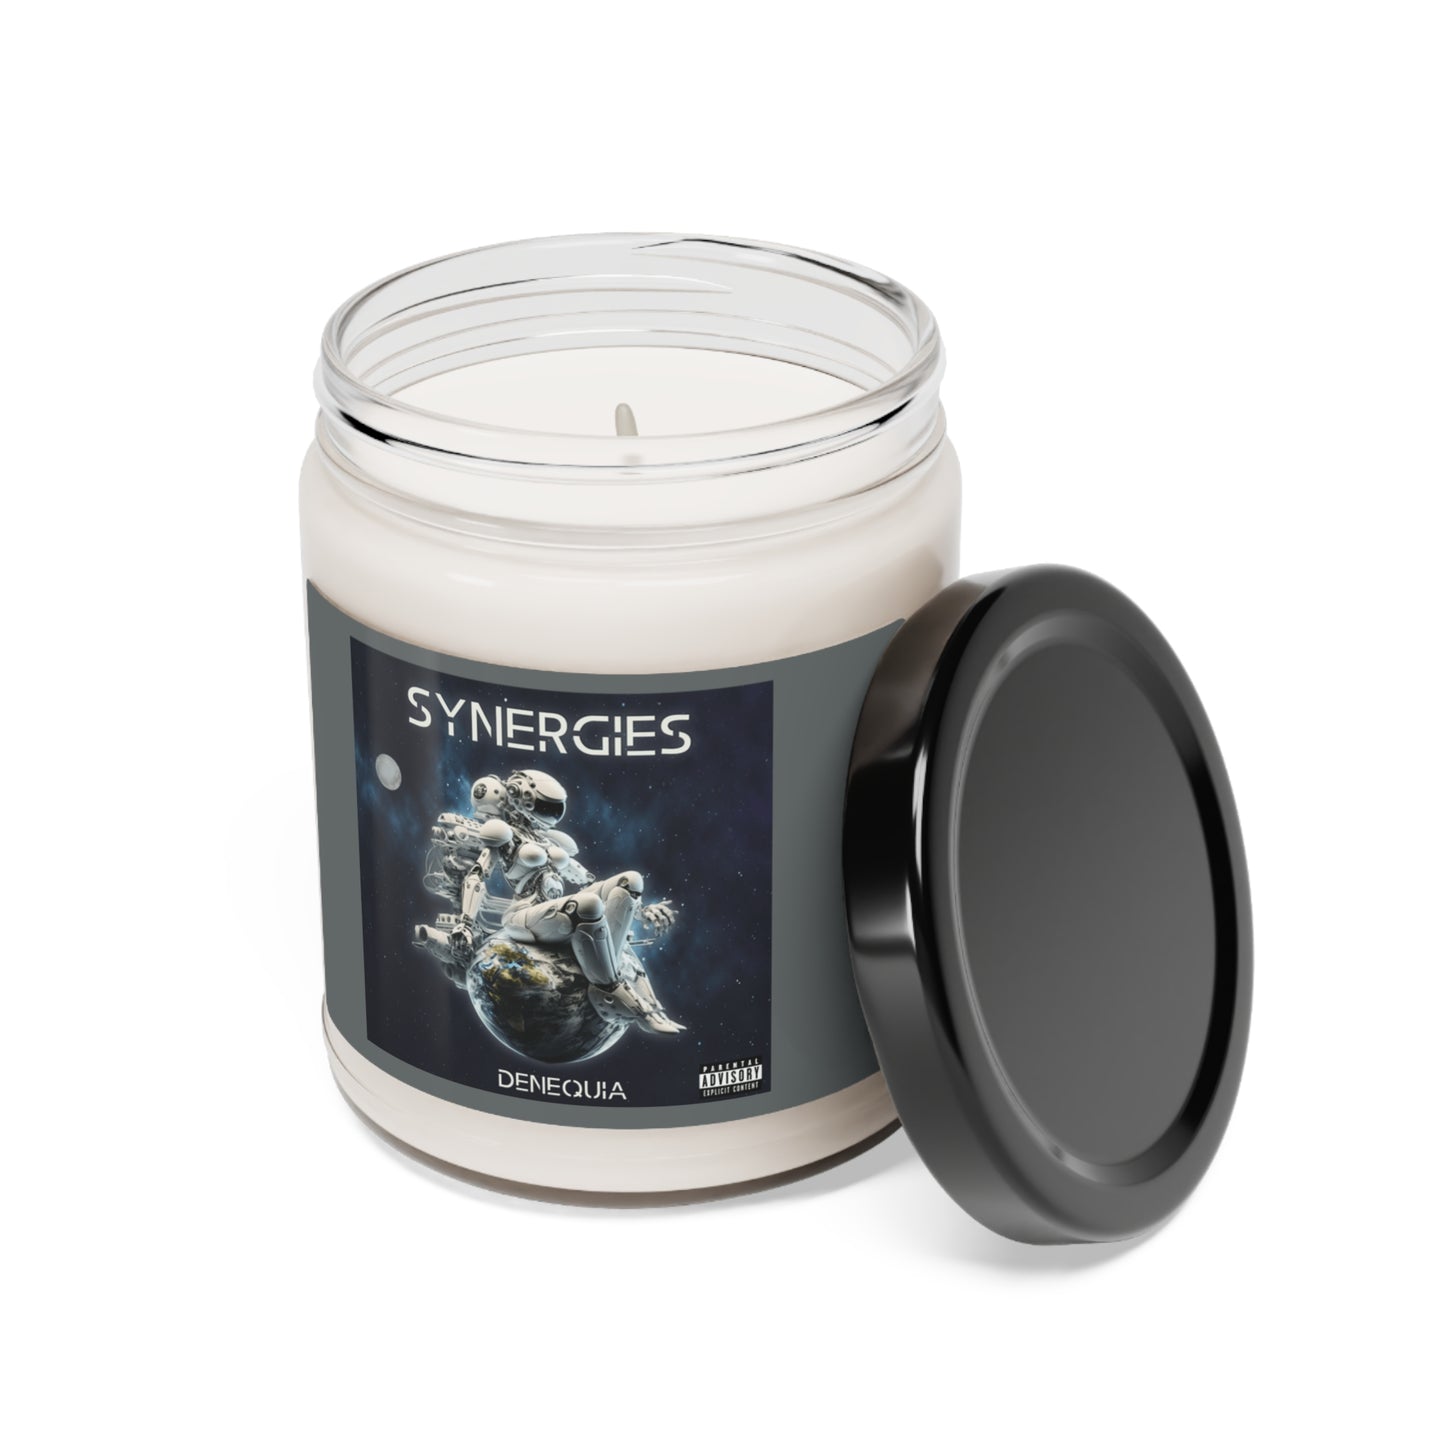 BOSS LADY DENEQUIA "SYNERGIES" INSPIRED Scented Soy Candle, 9oz